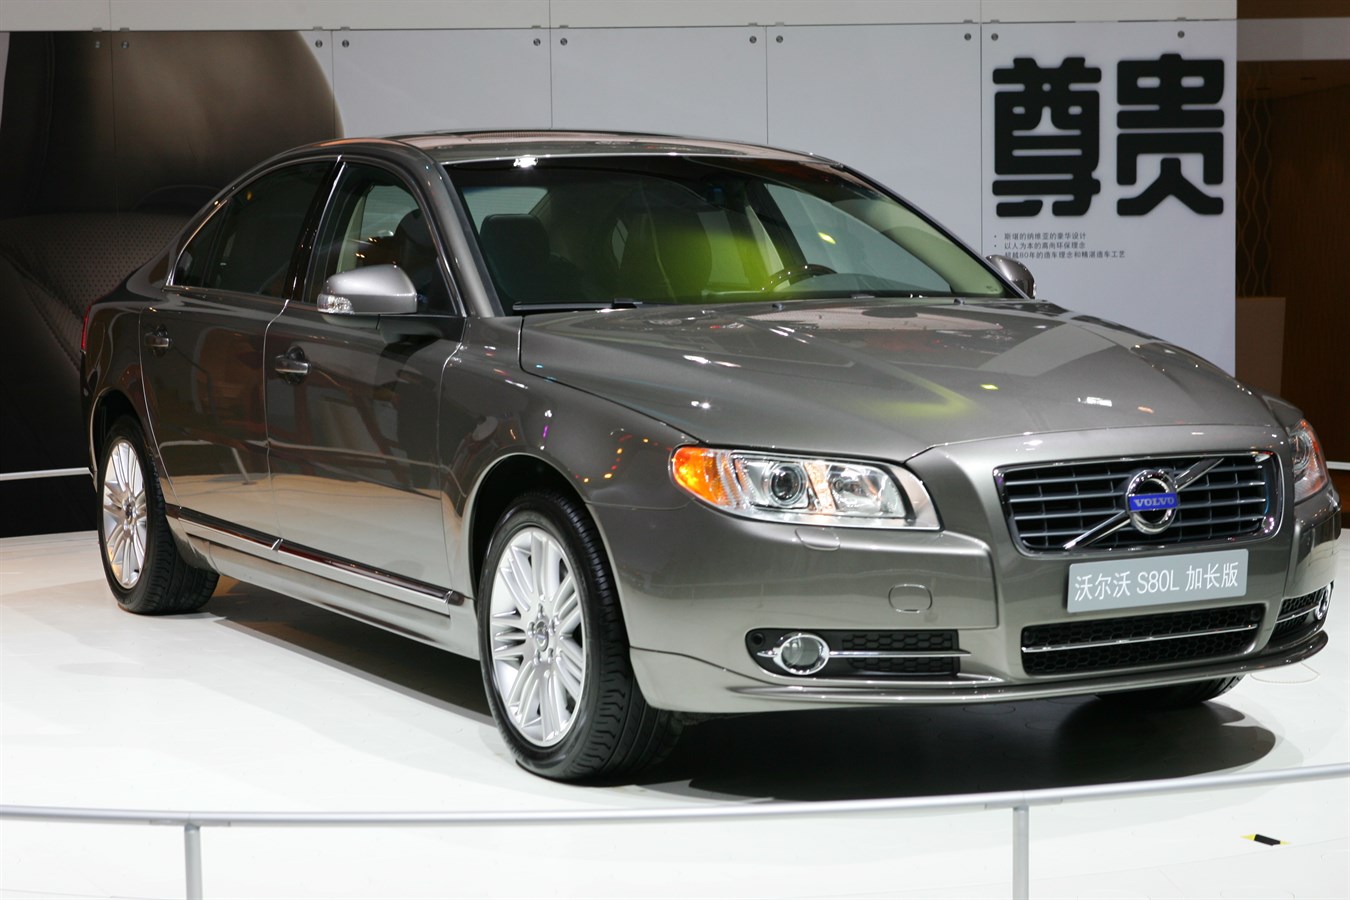 Volvo S80L - long wheelbase, built for the Chinese market (front/side)